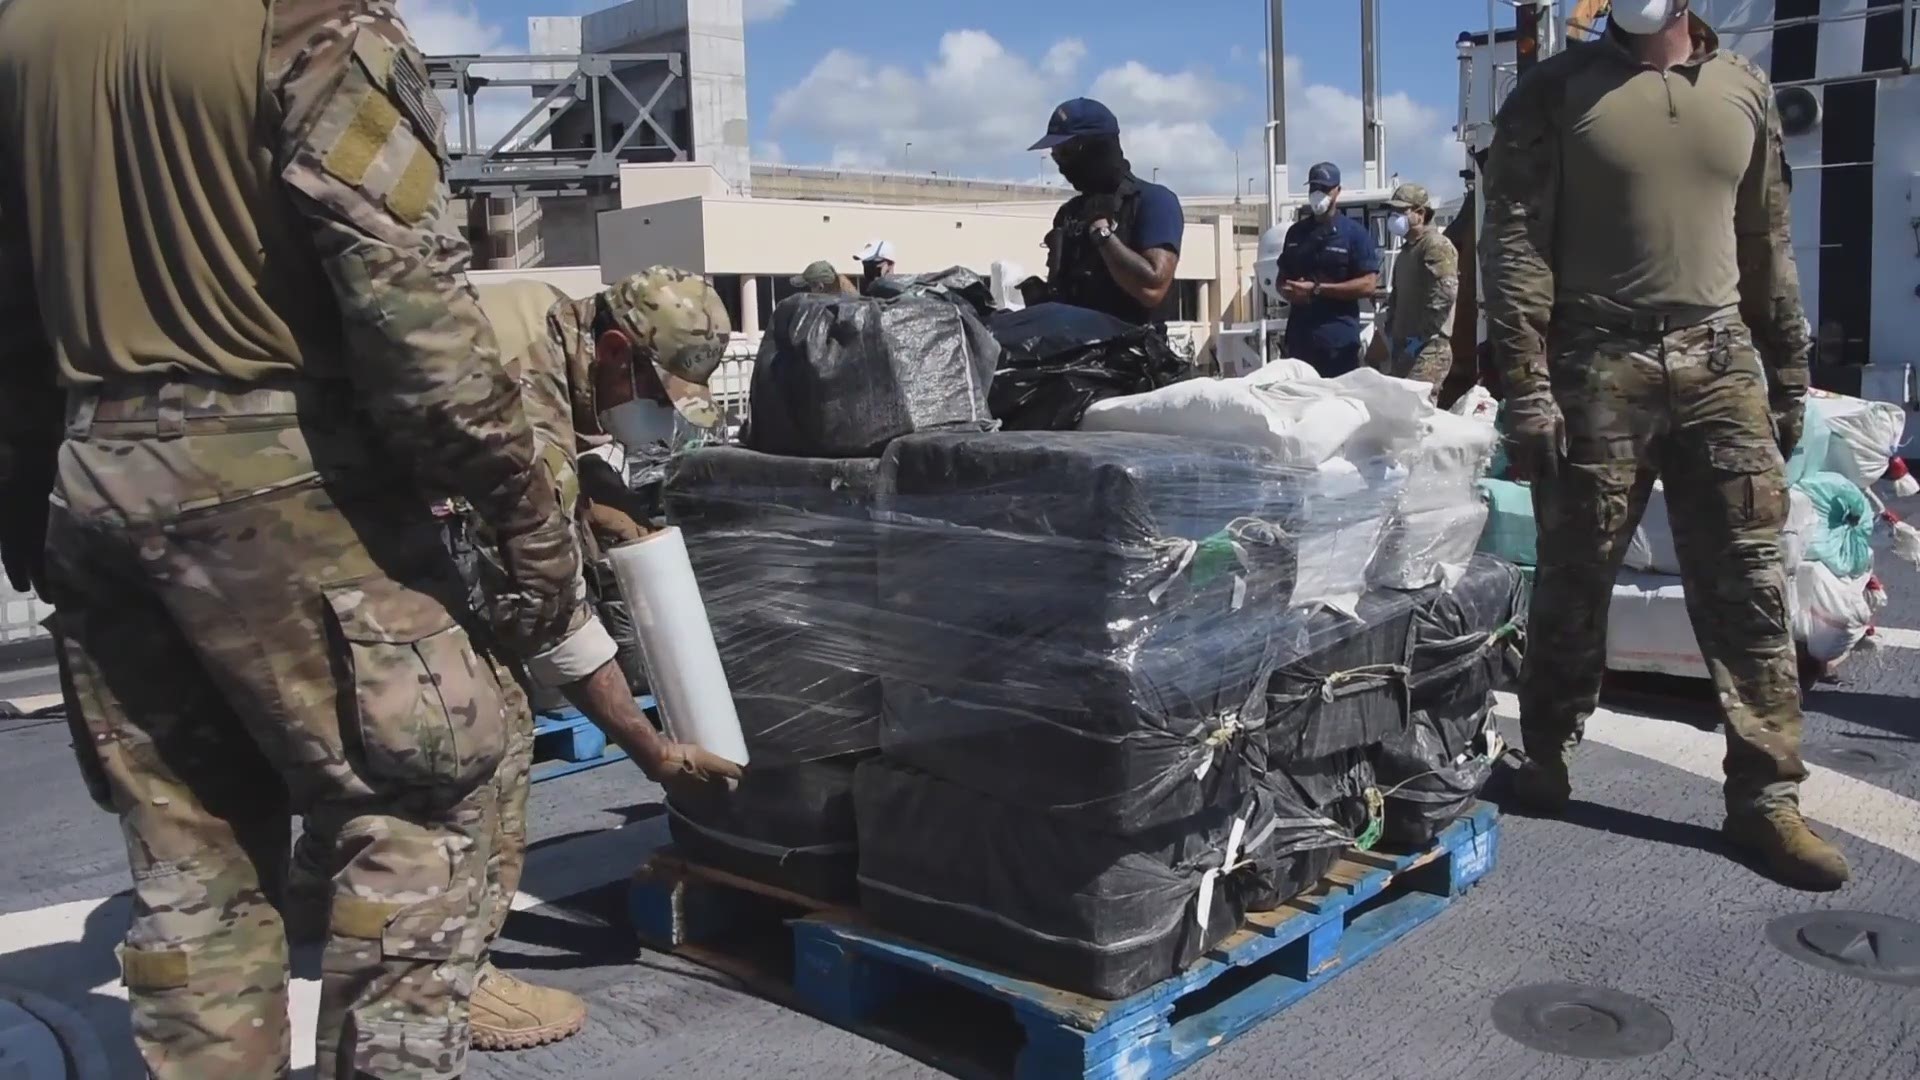 The haul unloaded at Port Everglades weighed about 6,800 pounds and is estimated to be worth about $118.3 million, US Coast Guard says.